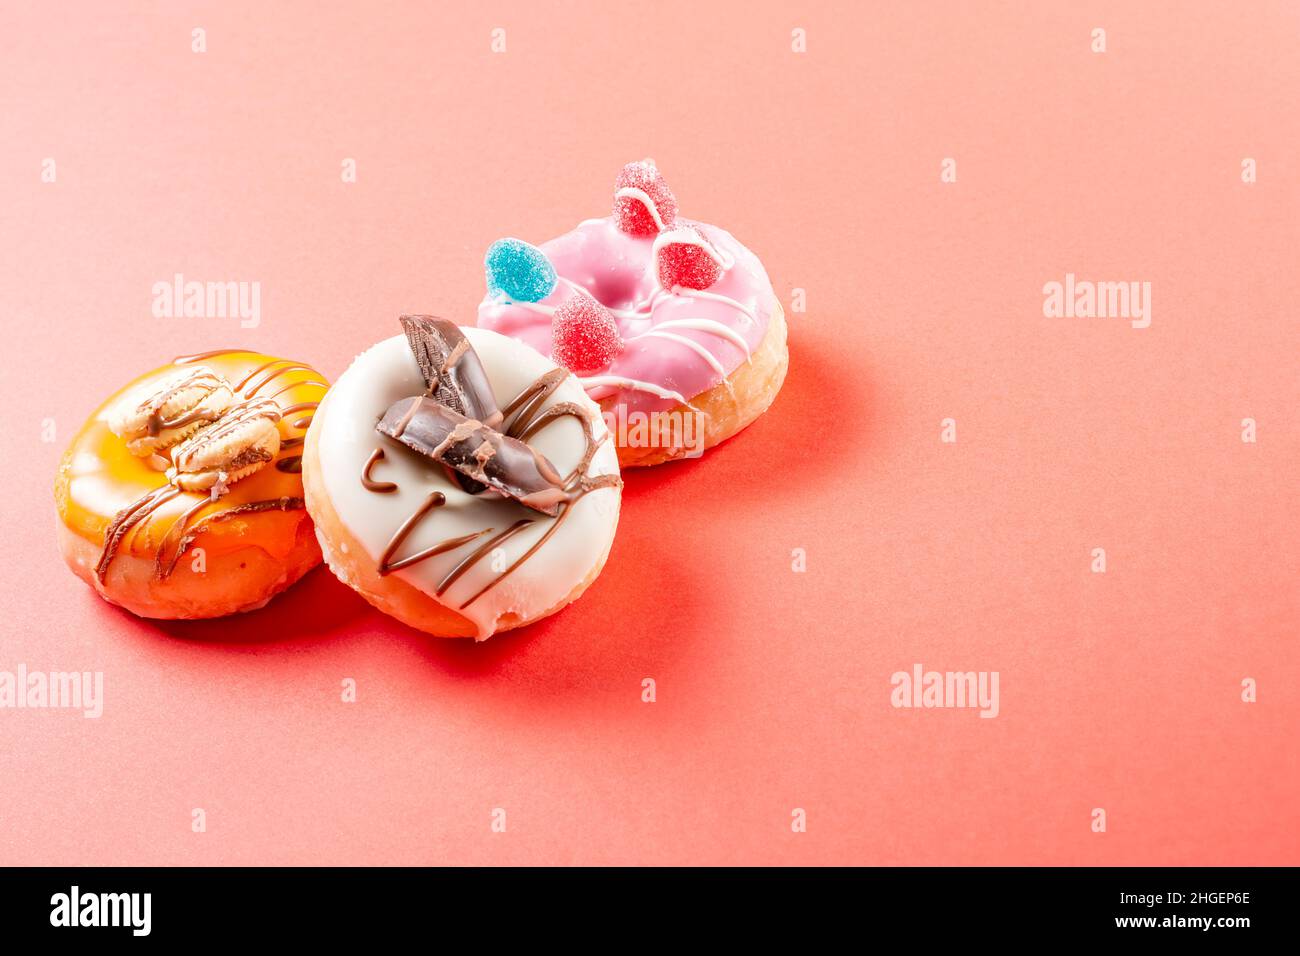 Photograph of three donuts decorated with cookies and jelly beans.The donuts are dipped in strawberry chocolate, dark chocolate and white chocolate.Ph Stock Photo